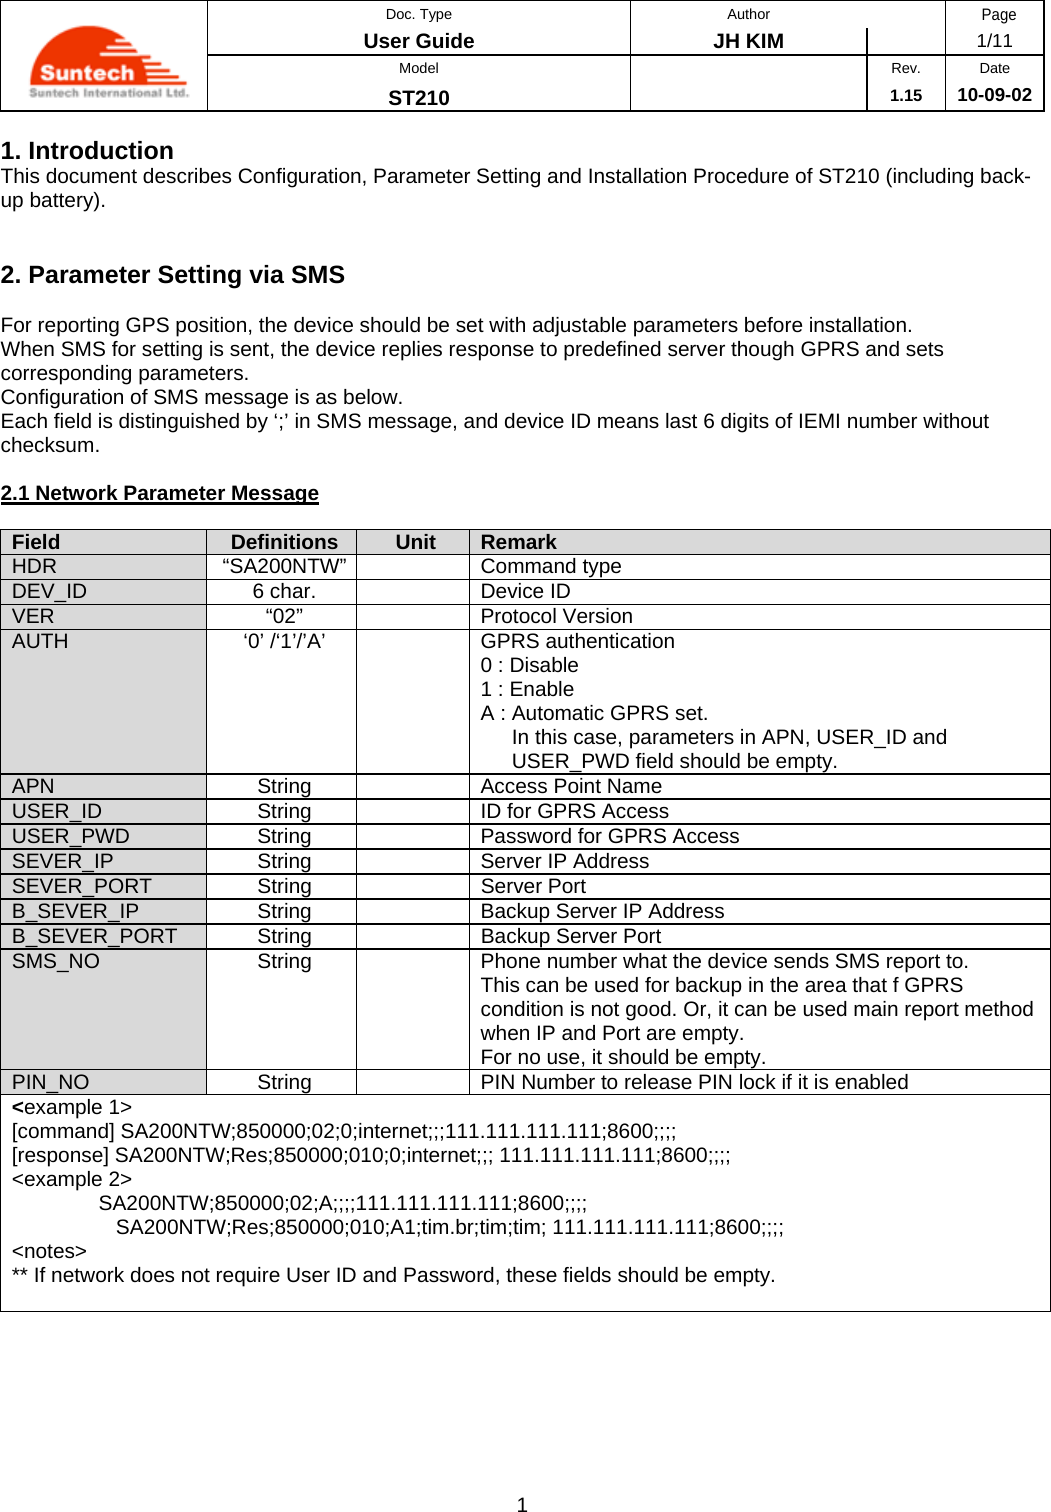  Doc. Type Author Page User Guide  JH KIM   1/11 Model  Rev. Date ST210   1.15 10-09-02 1 1. Introduction This document describes Configuration, Parameter Setting and Installation Procedure of ST210 (including back-up battery).   2. Parameter Setting via SMS  For reporting GPS position, the device should be set with adjustable parameters before installation. When SMS for setting is sent, the device replies response to predefined server though GPRS and sets corresponding parameters. Configuration of SMS message is as below. Each field is distinguished by ‘;’ in SMS message, and device ID means last 6 digits of IEMI number without checksum.  2.1 Network Parameter Message  Field  Definitions  Unit  Remark HDR “SA200NTW”  Command type DEV_ID  6 char.    Device ID VER “02”  Protocol Version AUTH  ‘0’ /‘1’/’A’    GPRS authentication 0 : Disable 1 : Enable A : Automatic GPRS set.  In this case, parameters in APN, USER_ID and  USER_PWD field should be empty. APN  String    Access Point Name USER_ID  String    ID for GPRS Access USER_PWD  String    Password for GPRS Access SEVER_IP  String    Server IP Address SEVER_PORT String  Server Port B_SEVER_IP  String    Backup Server IP Address B_SEVER_PORT  String    Backup Server Port SMS_NO  String    Phone number what the device sends SMS report to. This can be used for backup in the area that f GPRS condition is not good. Or, it can be used main report method when IP and Port are empty. For no use, it should be empty. PIN_NO  String    PIN Number to release PIN lock if it is enabled &lt;example 1&gt; [command] SA200NTW;850000;02;0;internet;;;111.111.111.111;8600;;;;  [response] SA200NTW;Res;850000;010;0;internet;;; 111.111.111.111;8600;;;; &lt;example 2&gt;                SA200NTW;850000;02;A;;;;111.111.111.111;8600;;;; SA200NTW;Res;850000;010;A1;tim.br;tim;tim; 111.111.111.111;8600;;;; &lt;notes&gt; ** If network does not require User ID and Password, these fields should be empty.  